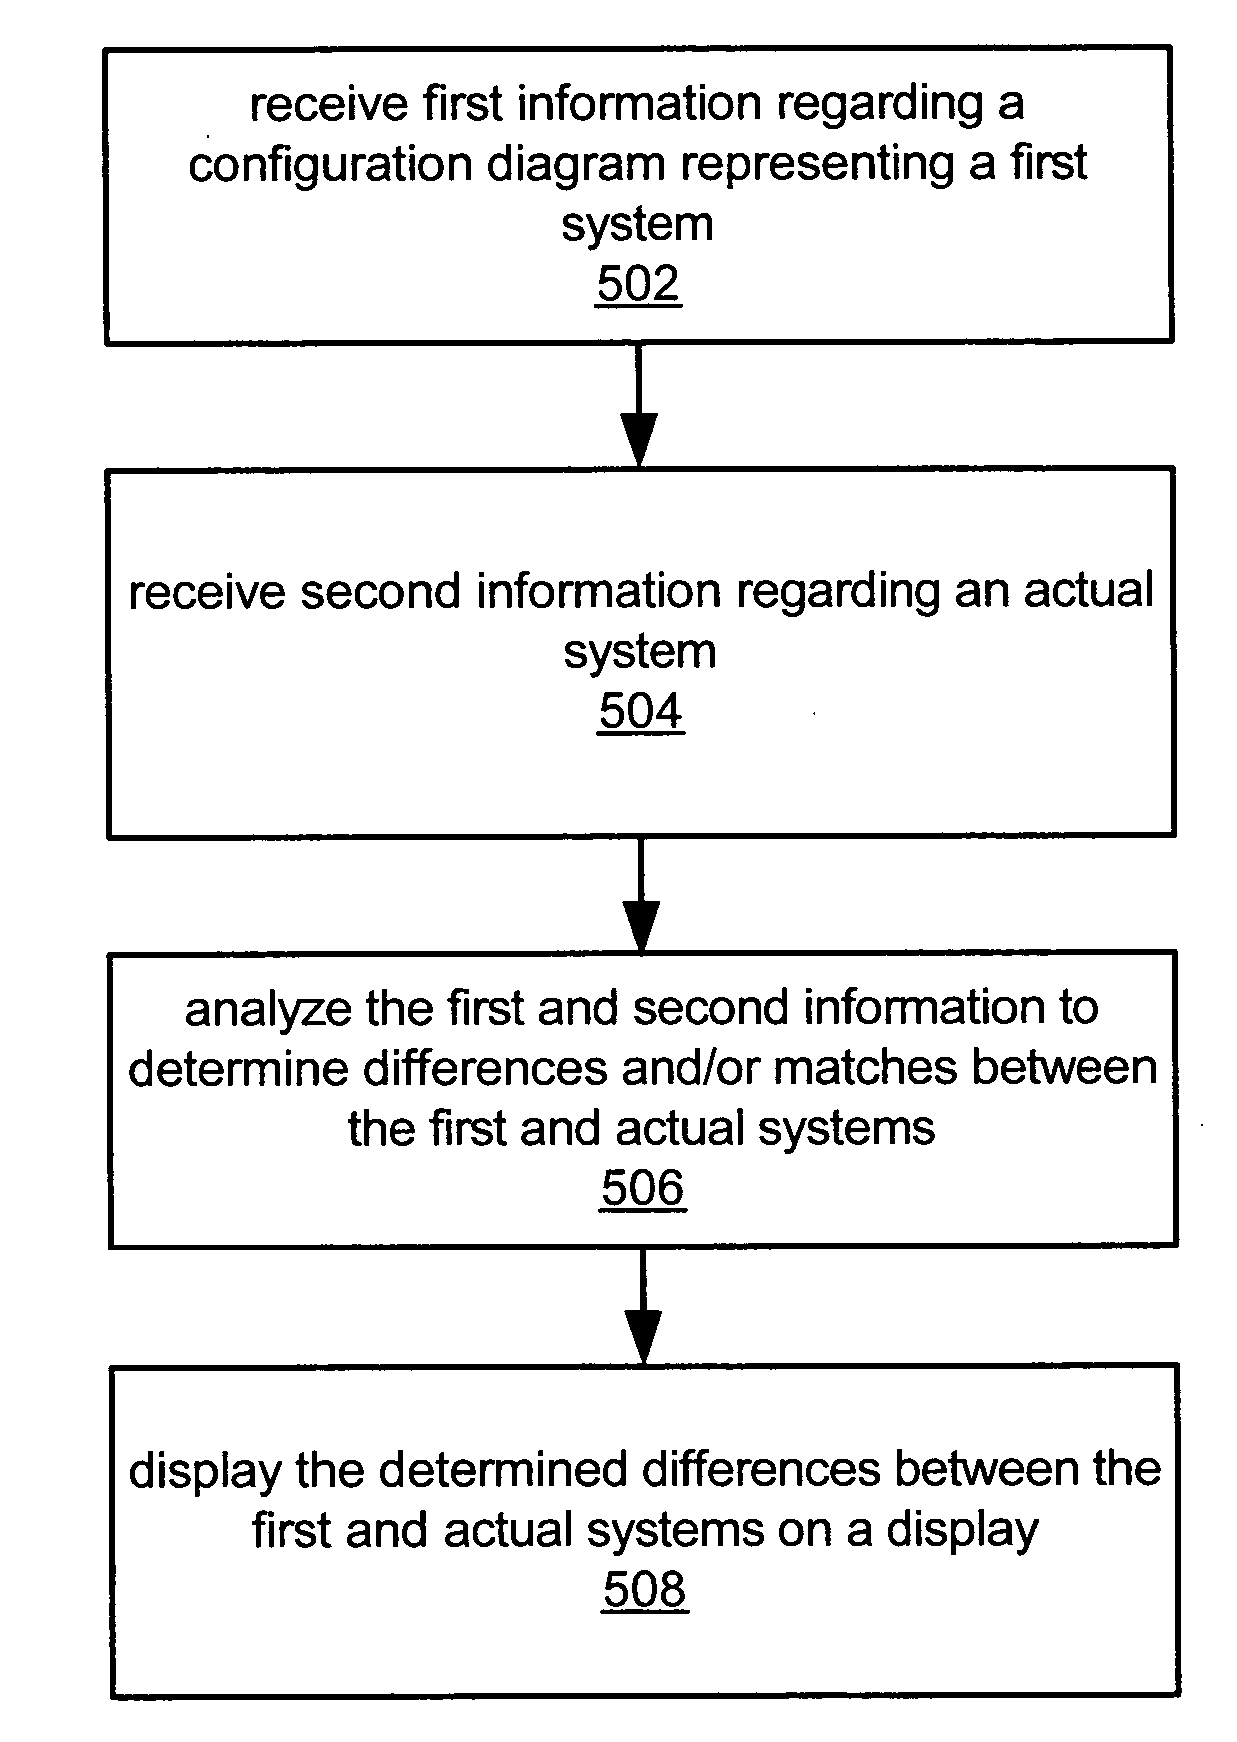 Comparing a configuration diagram to an actual system